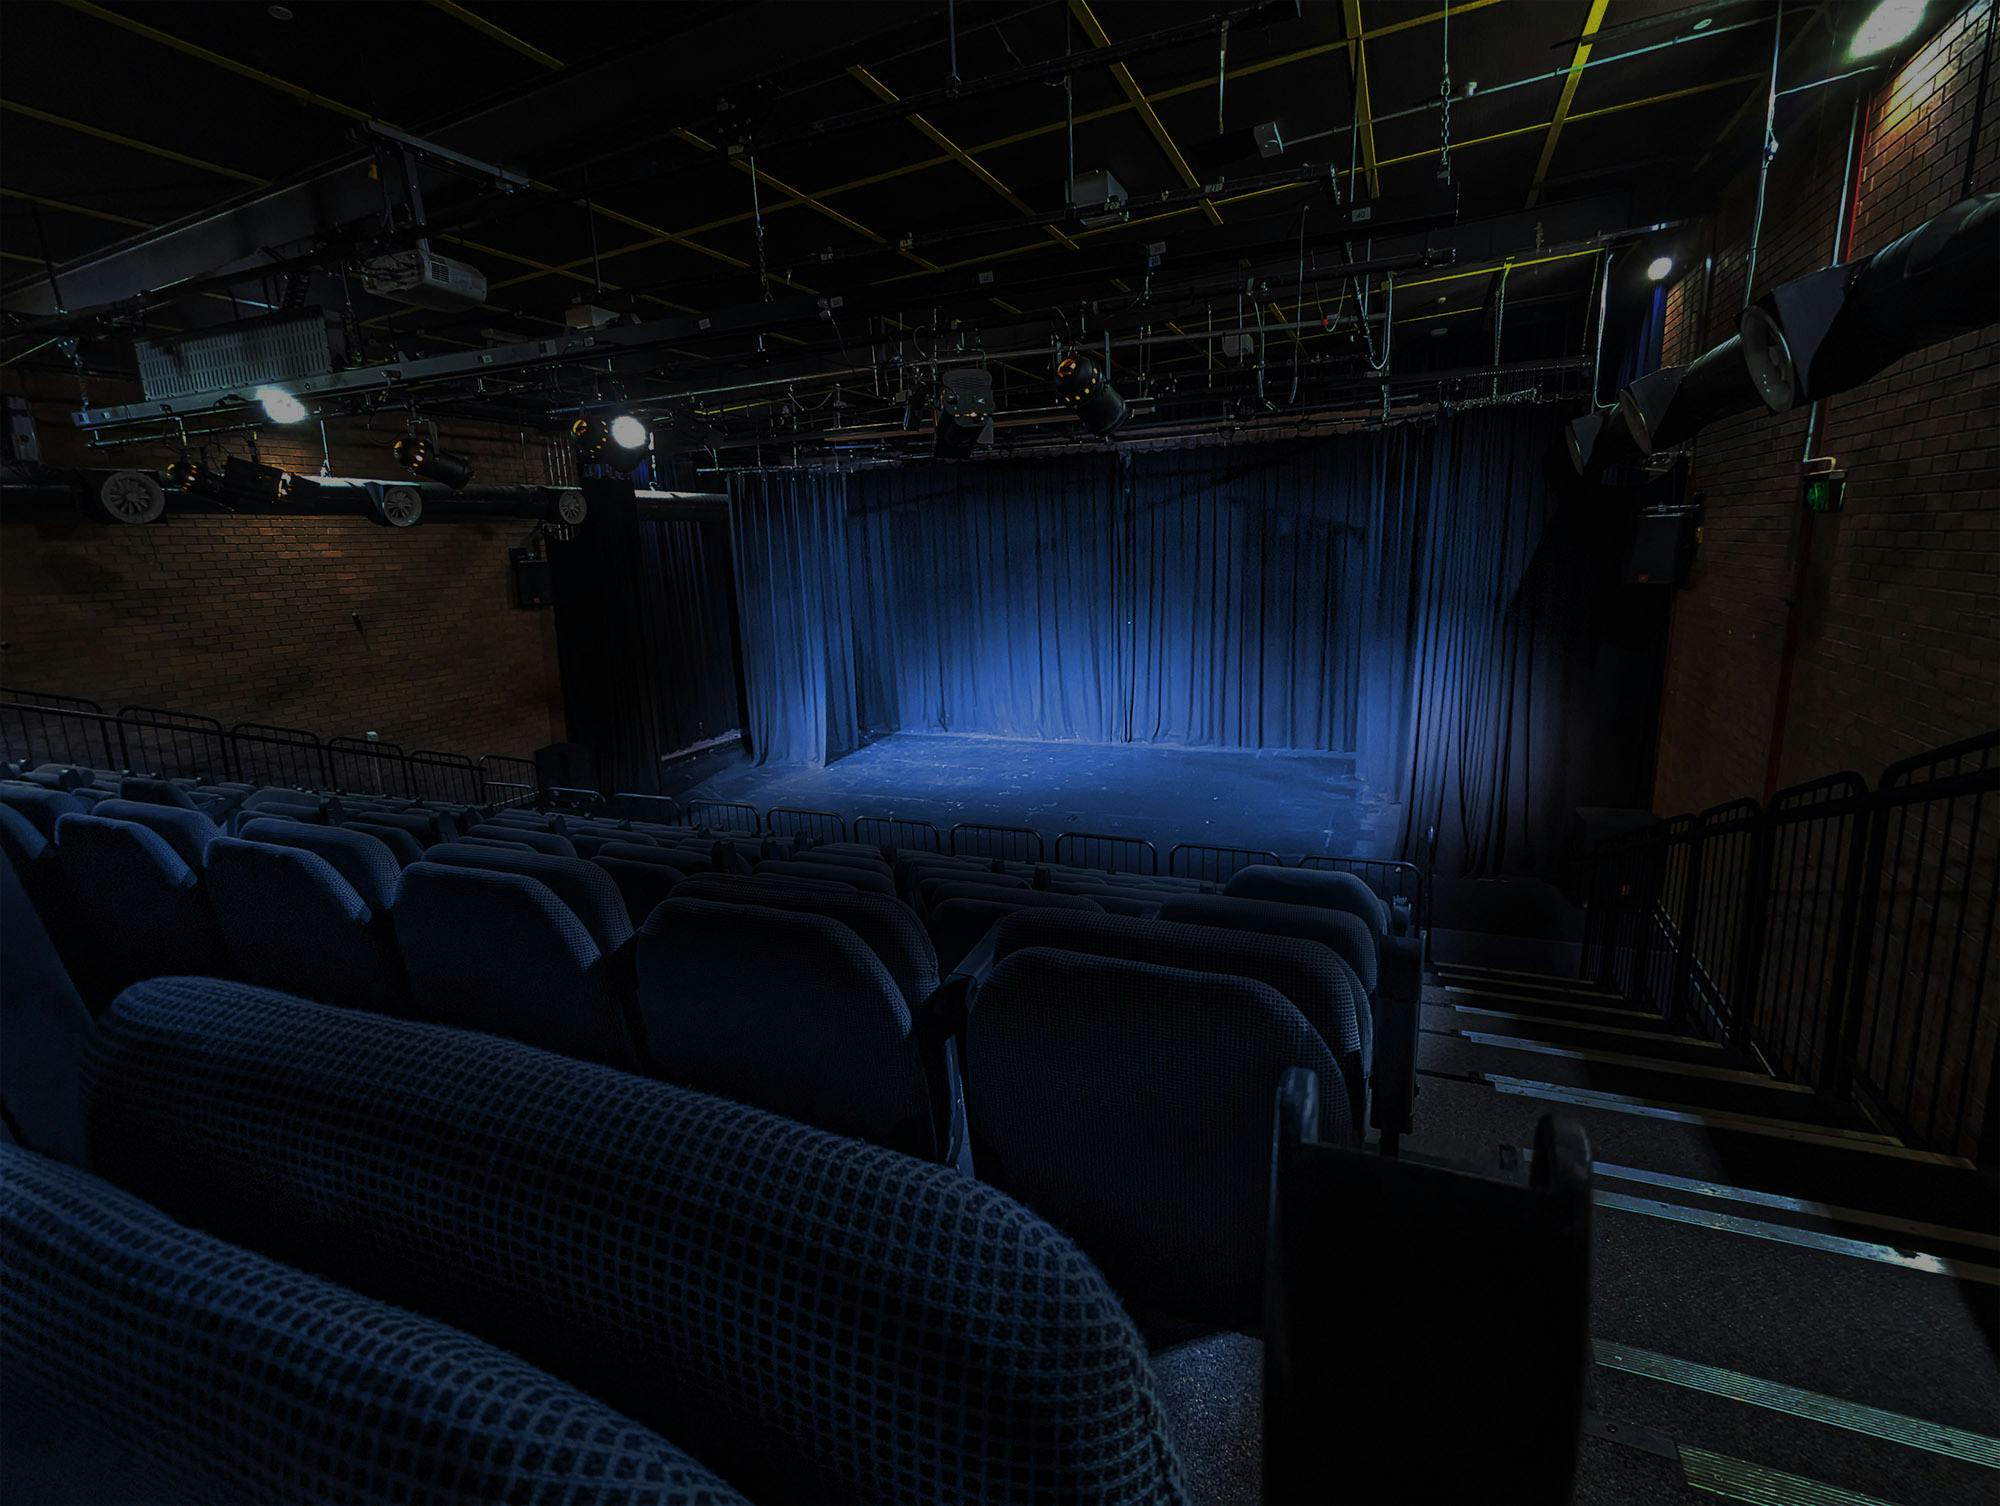 The Belconnen Community Theatre bathed in blue lighting